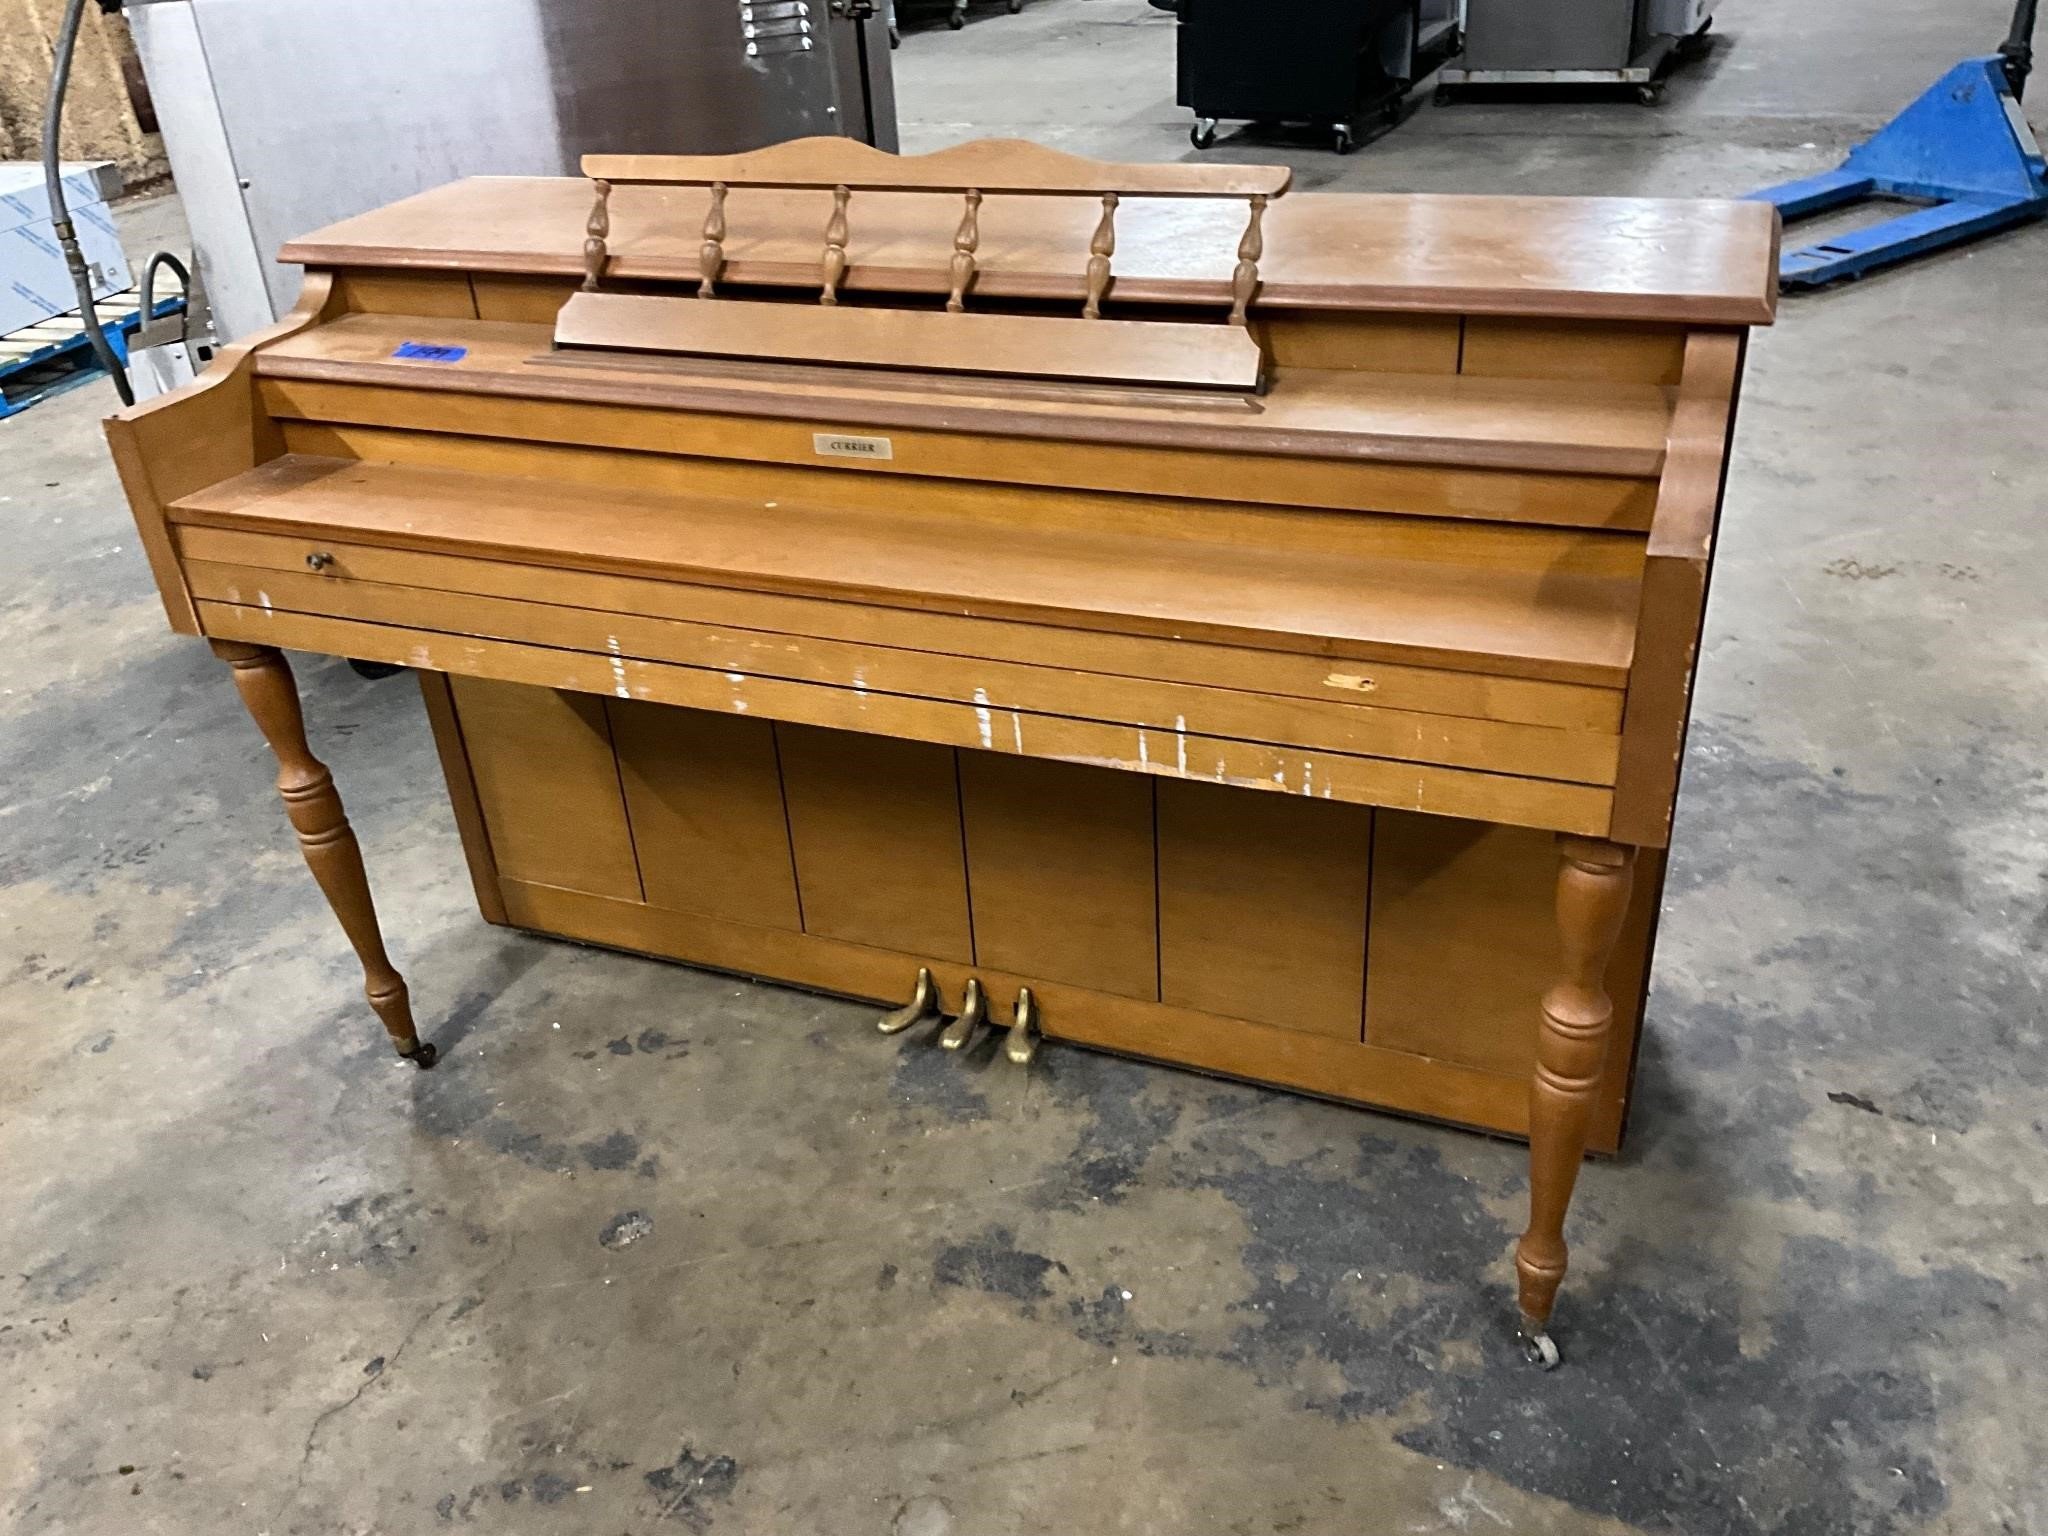 Currier Piano